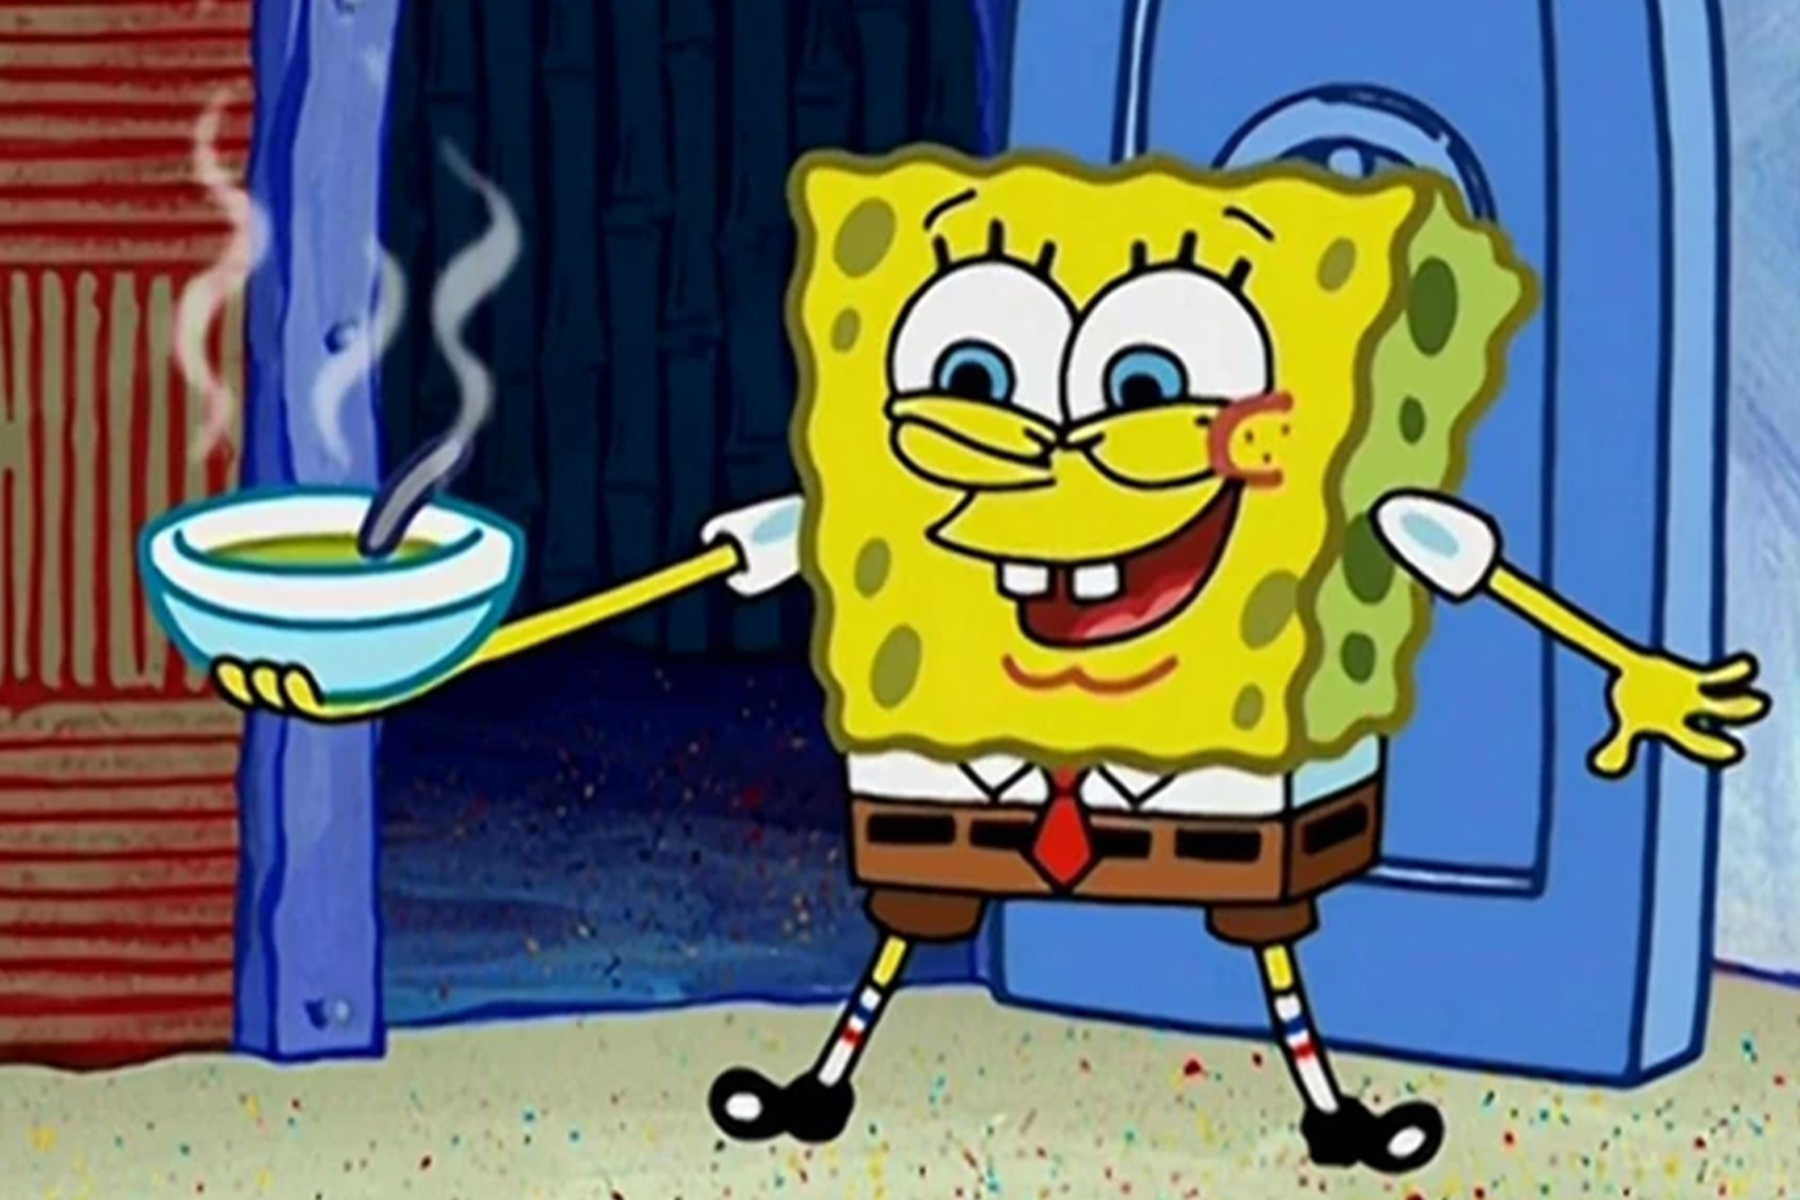 SpongeBob SquarePants is holding a bowl with hot soup.